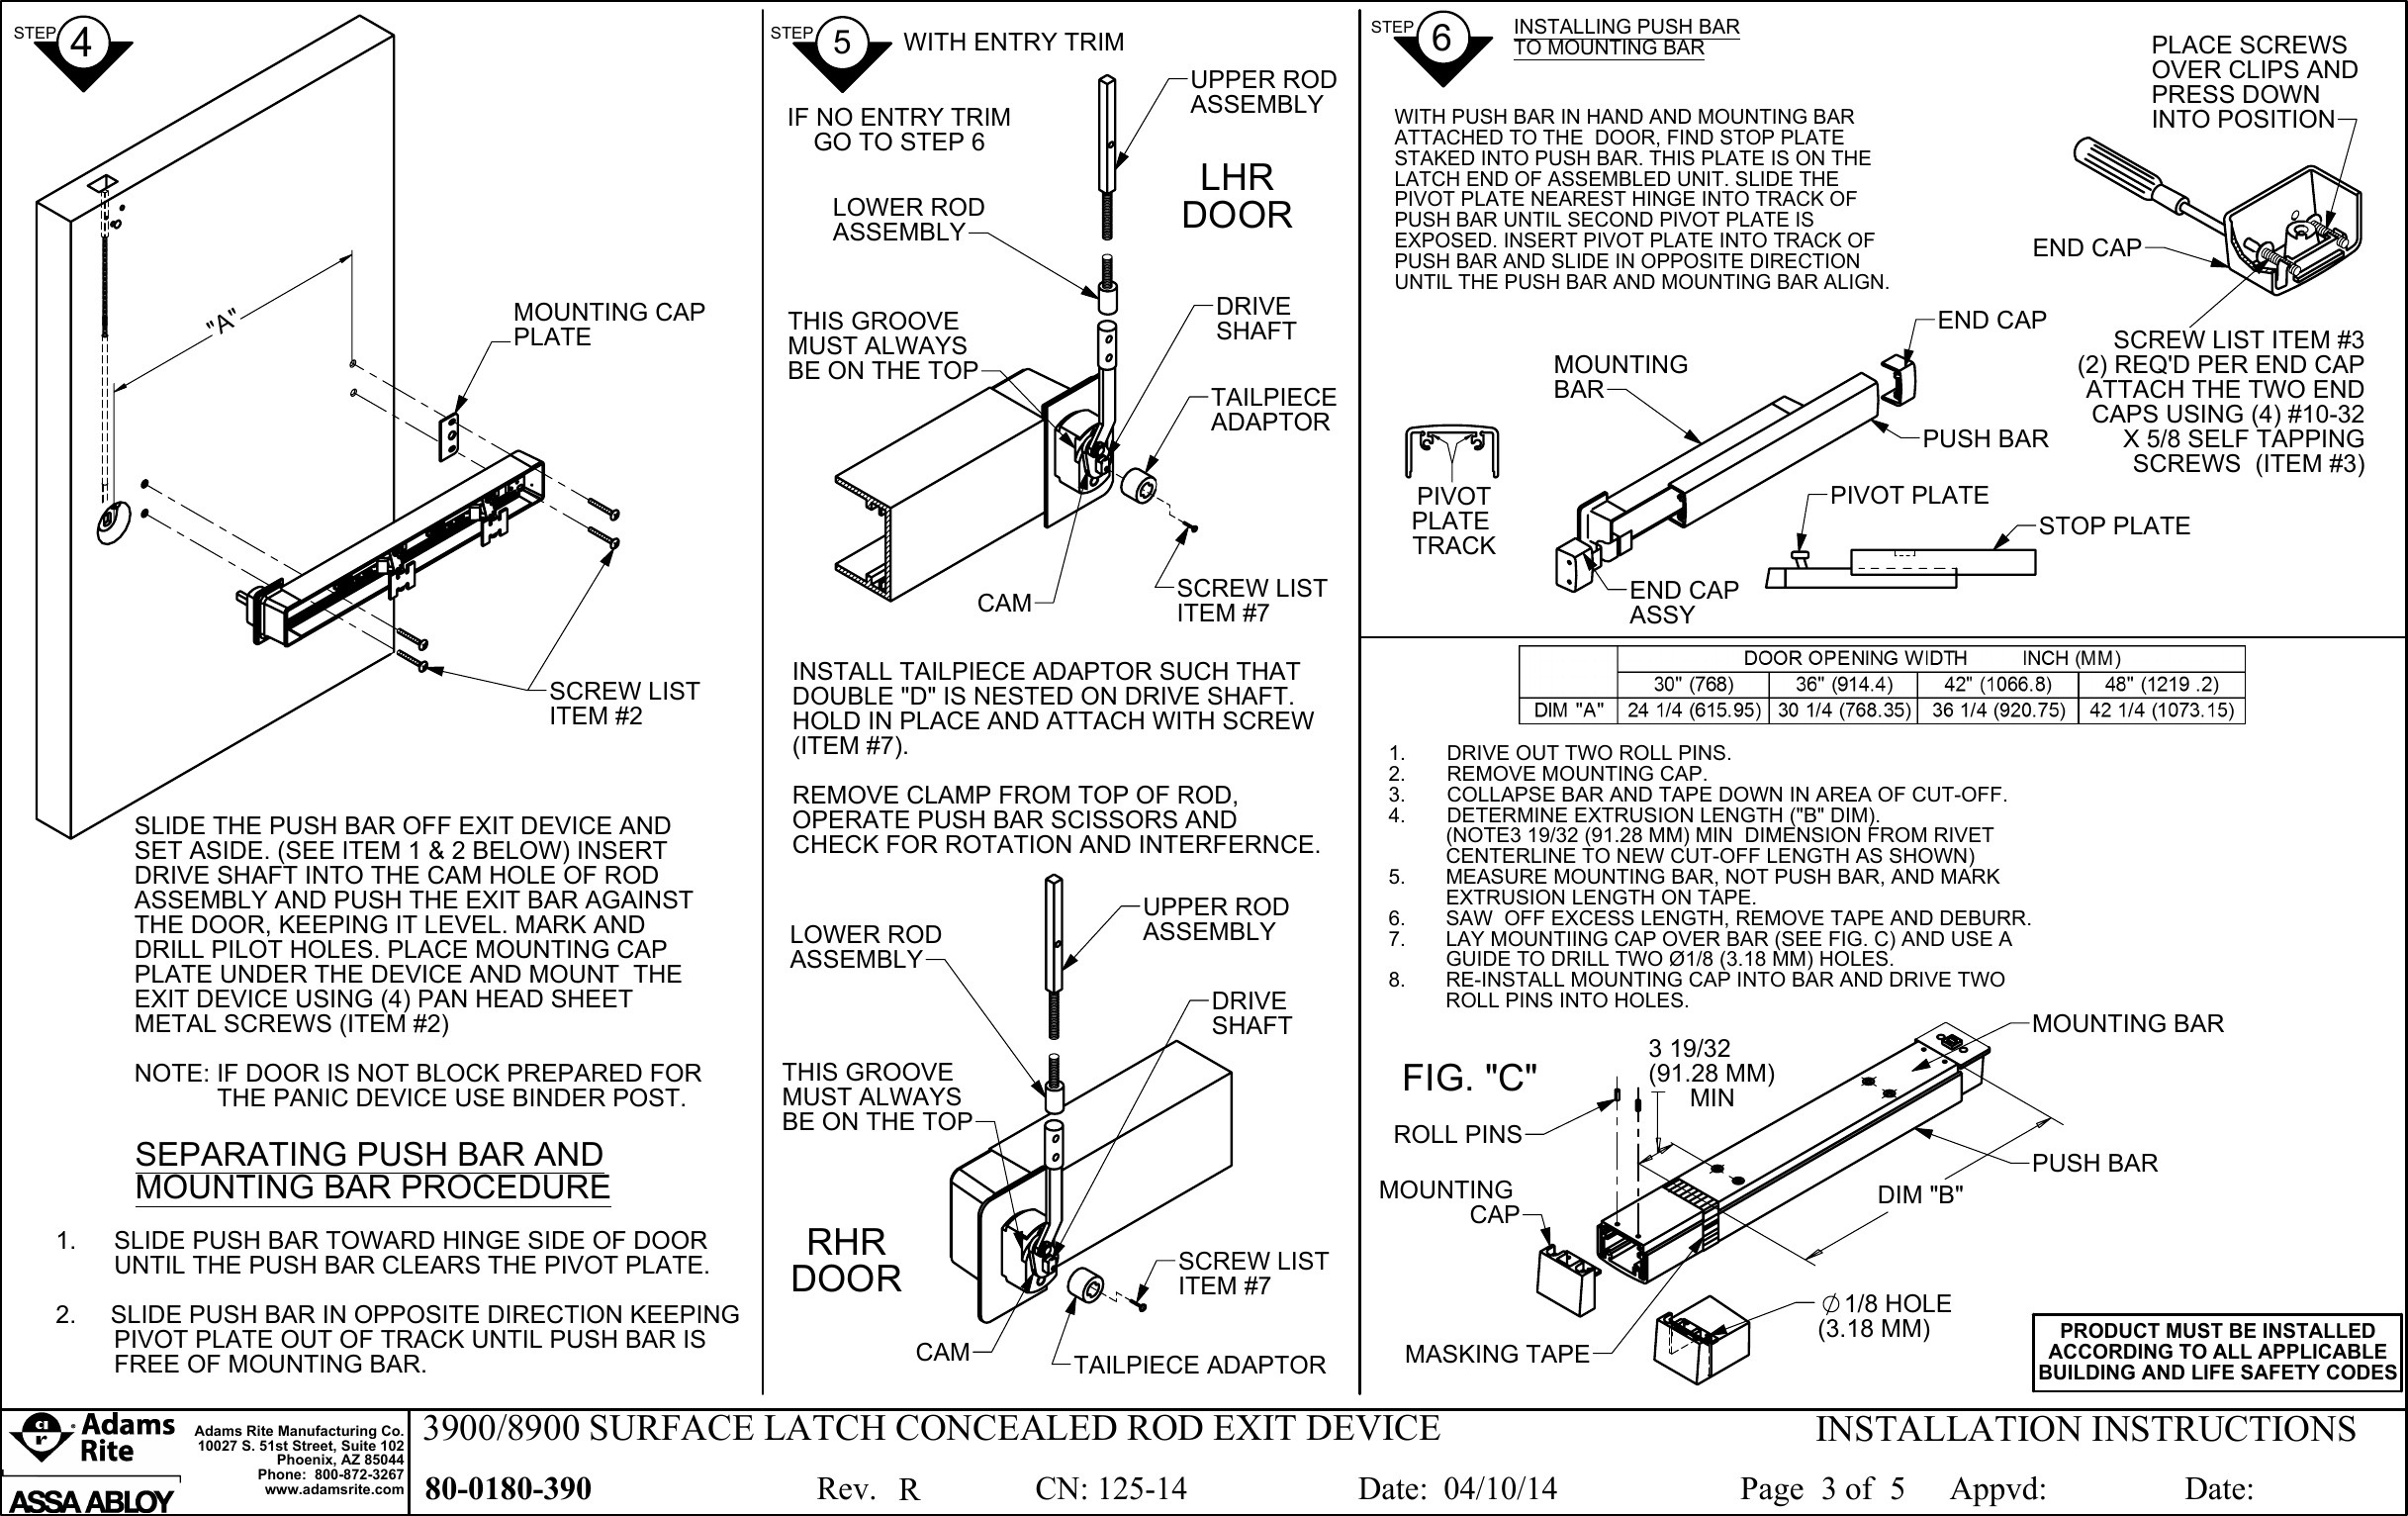 Page 3 of 5 - Adams Rite 80-0180-390_R 3900/8900 Surface Latch Concealed Rod Exit Device Installation Instructions 3900 8900 80-0180-390 R